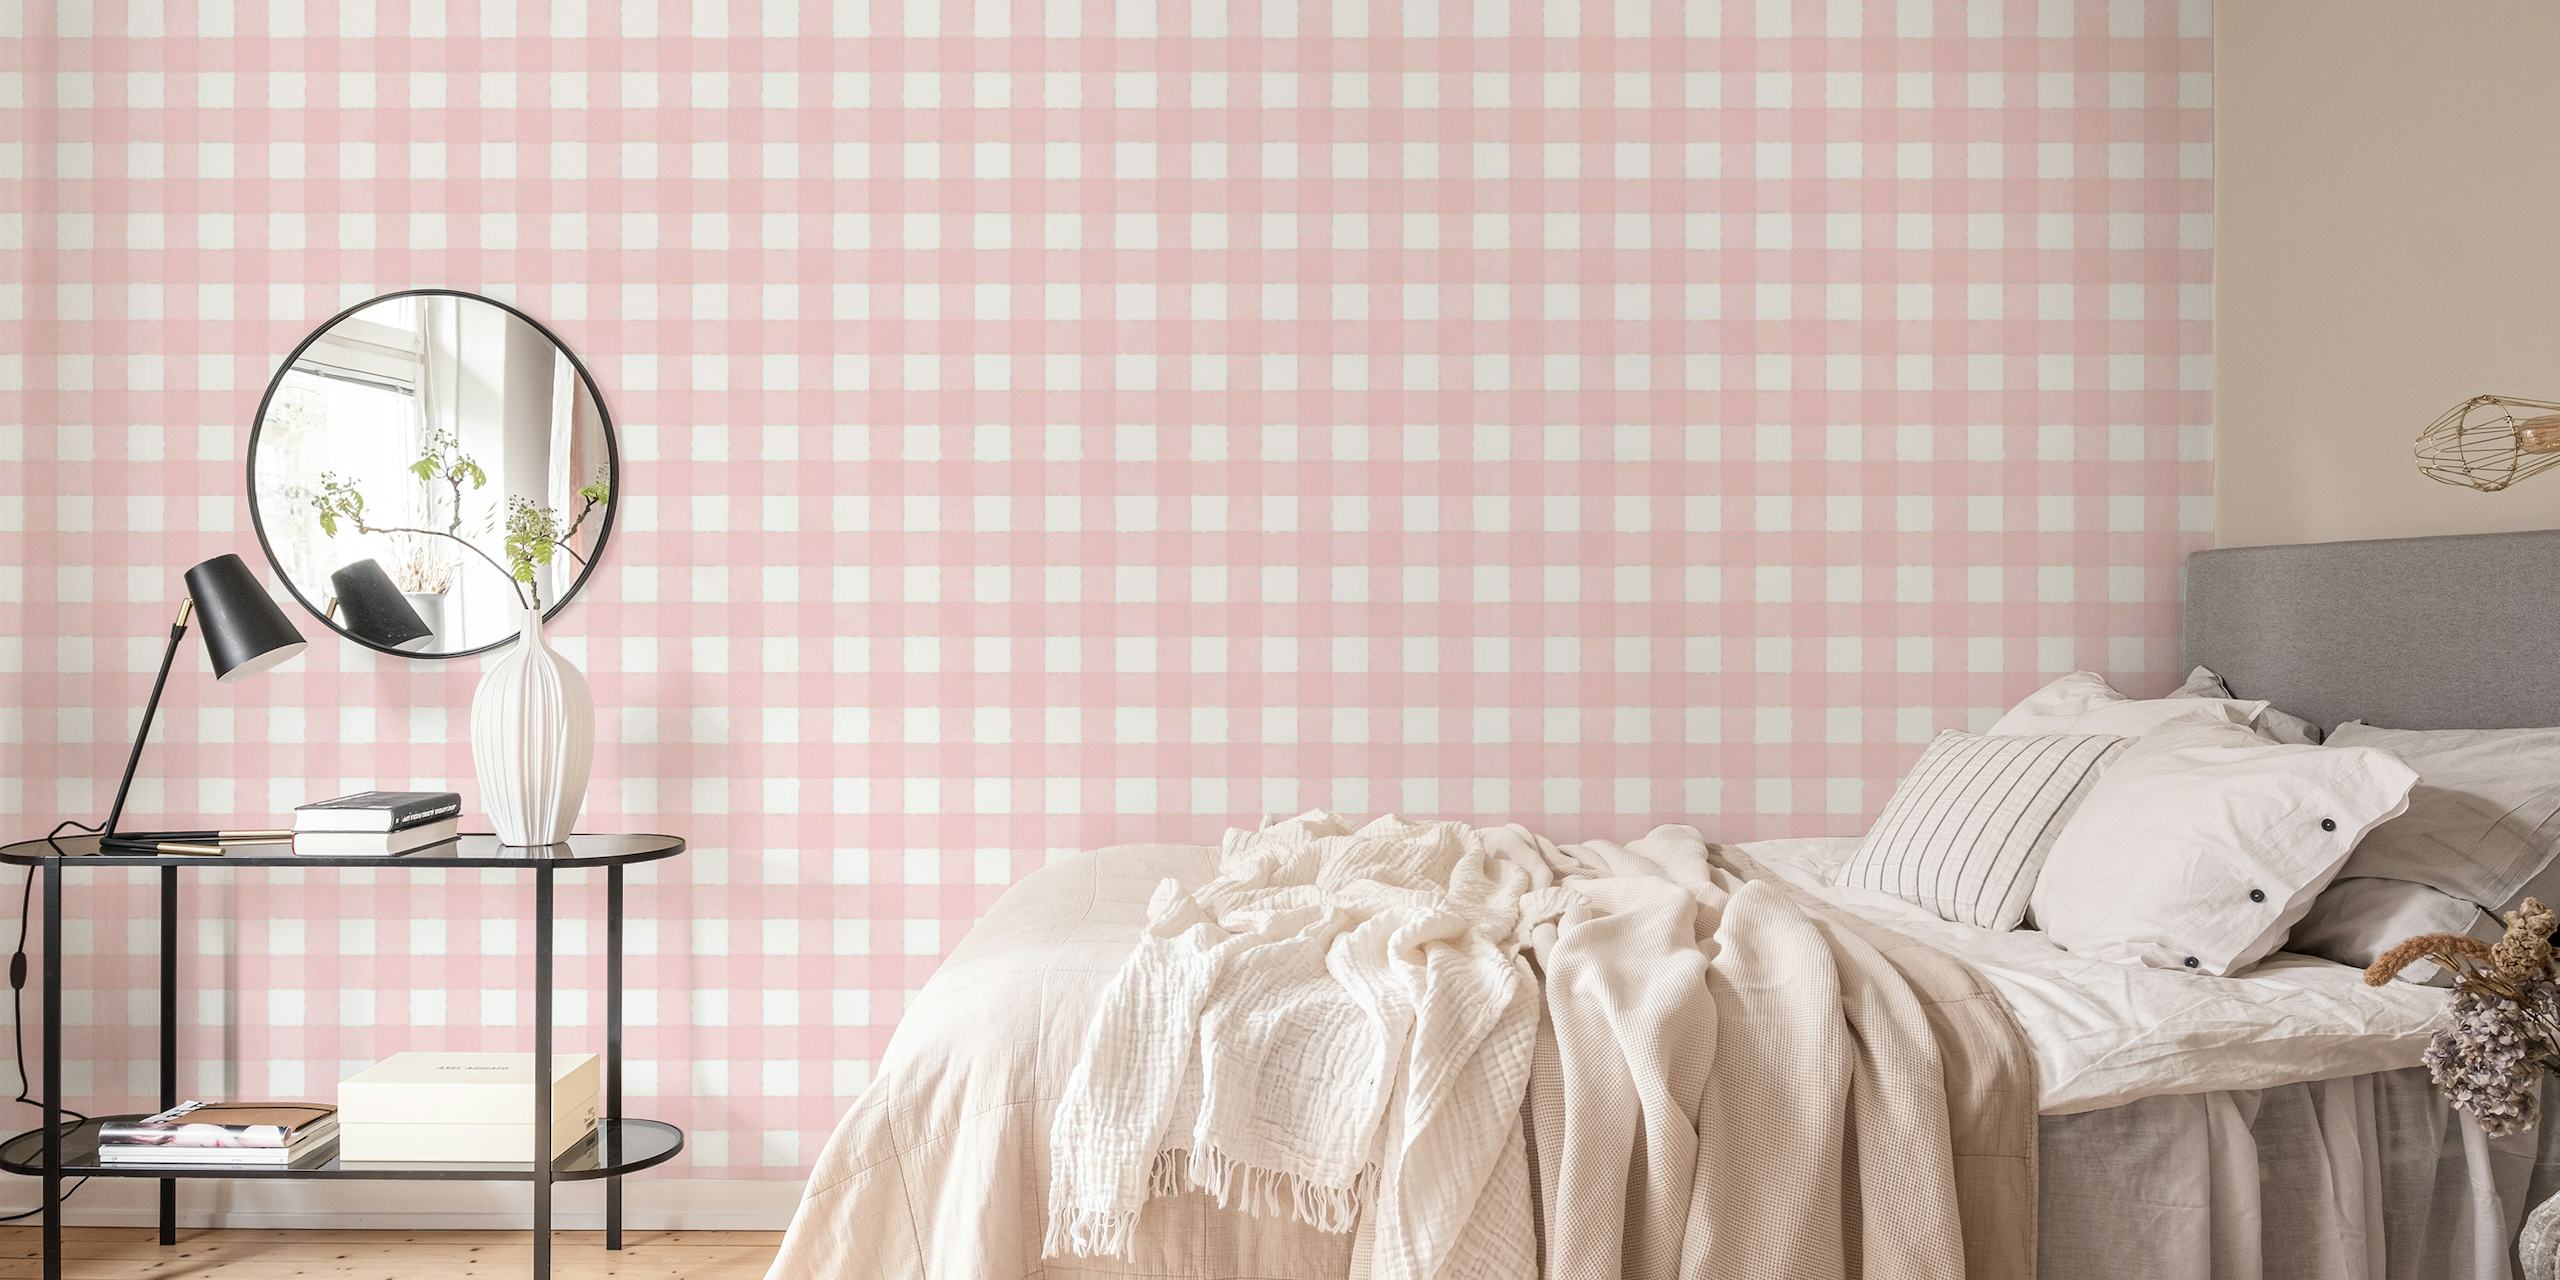 Subtle pink and white striped wall mural from happywall.com